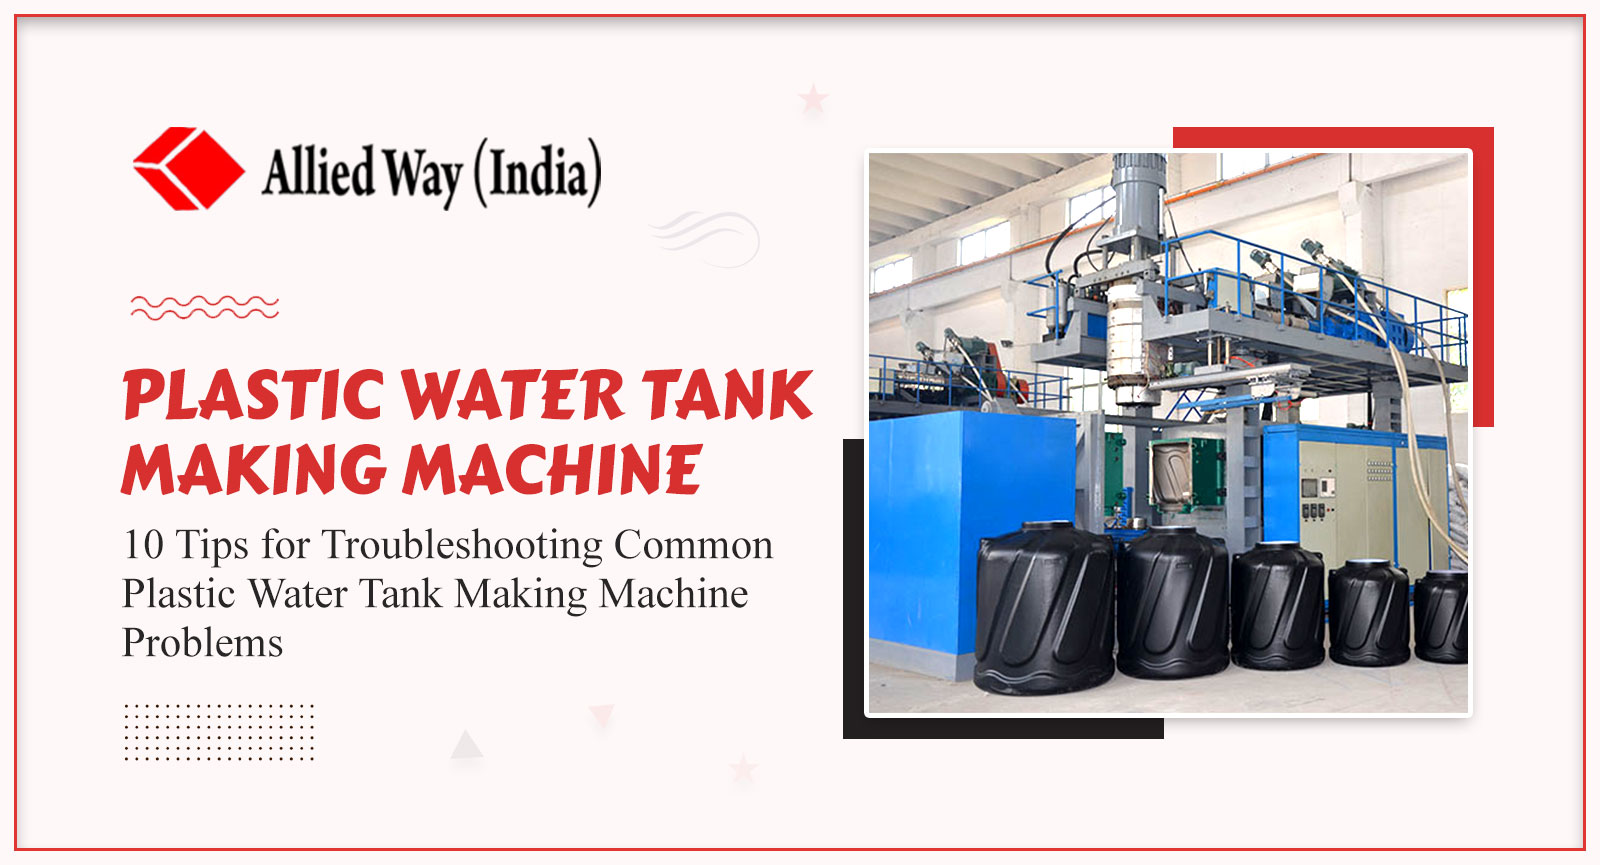 10 Tips for Troubleshooting Common Plastic Water Tank Making Machine Problems, Allied Way (India)